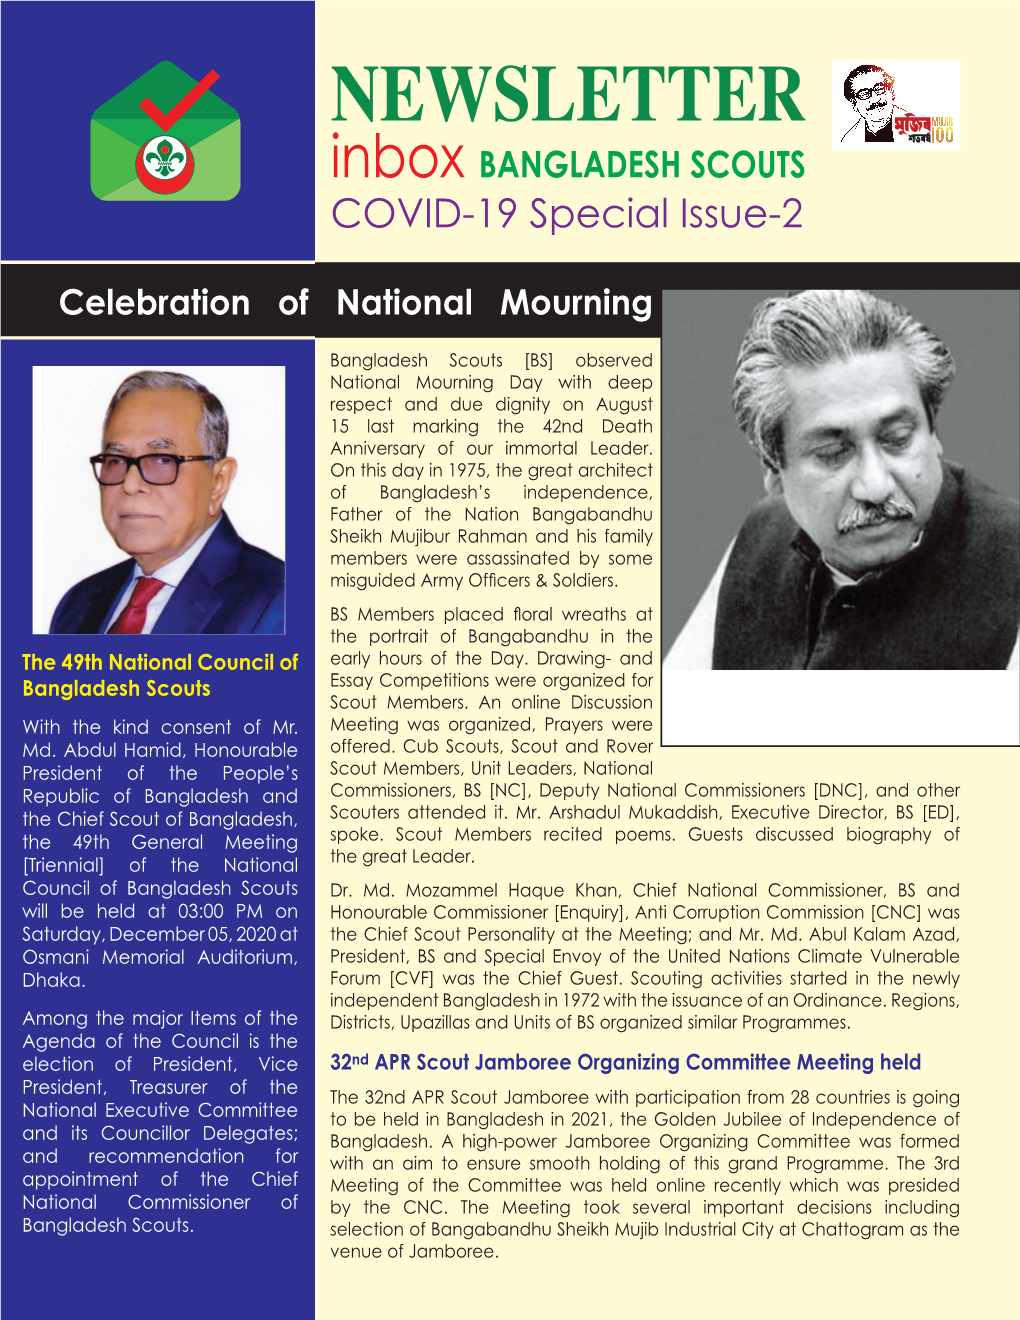 NEWSLETTER Inbox BANGLADESH SCOUTS COVID-19 Special Issue-2